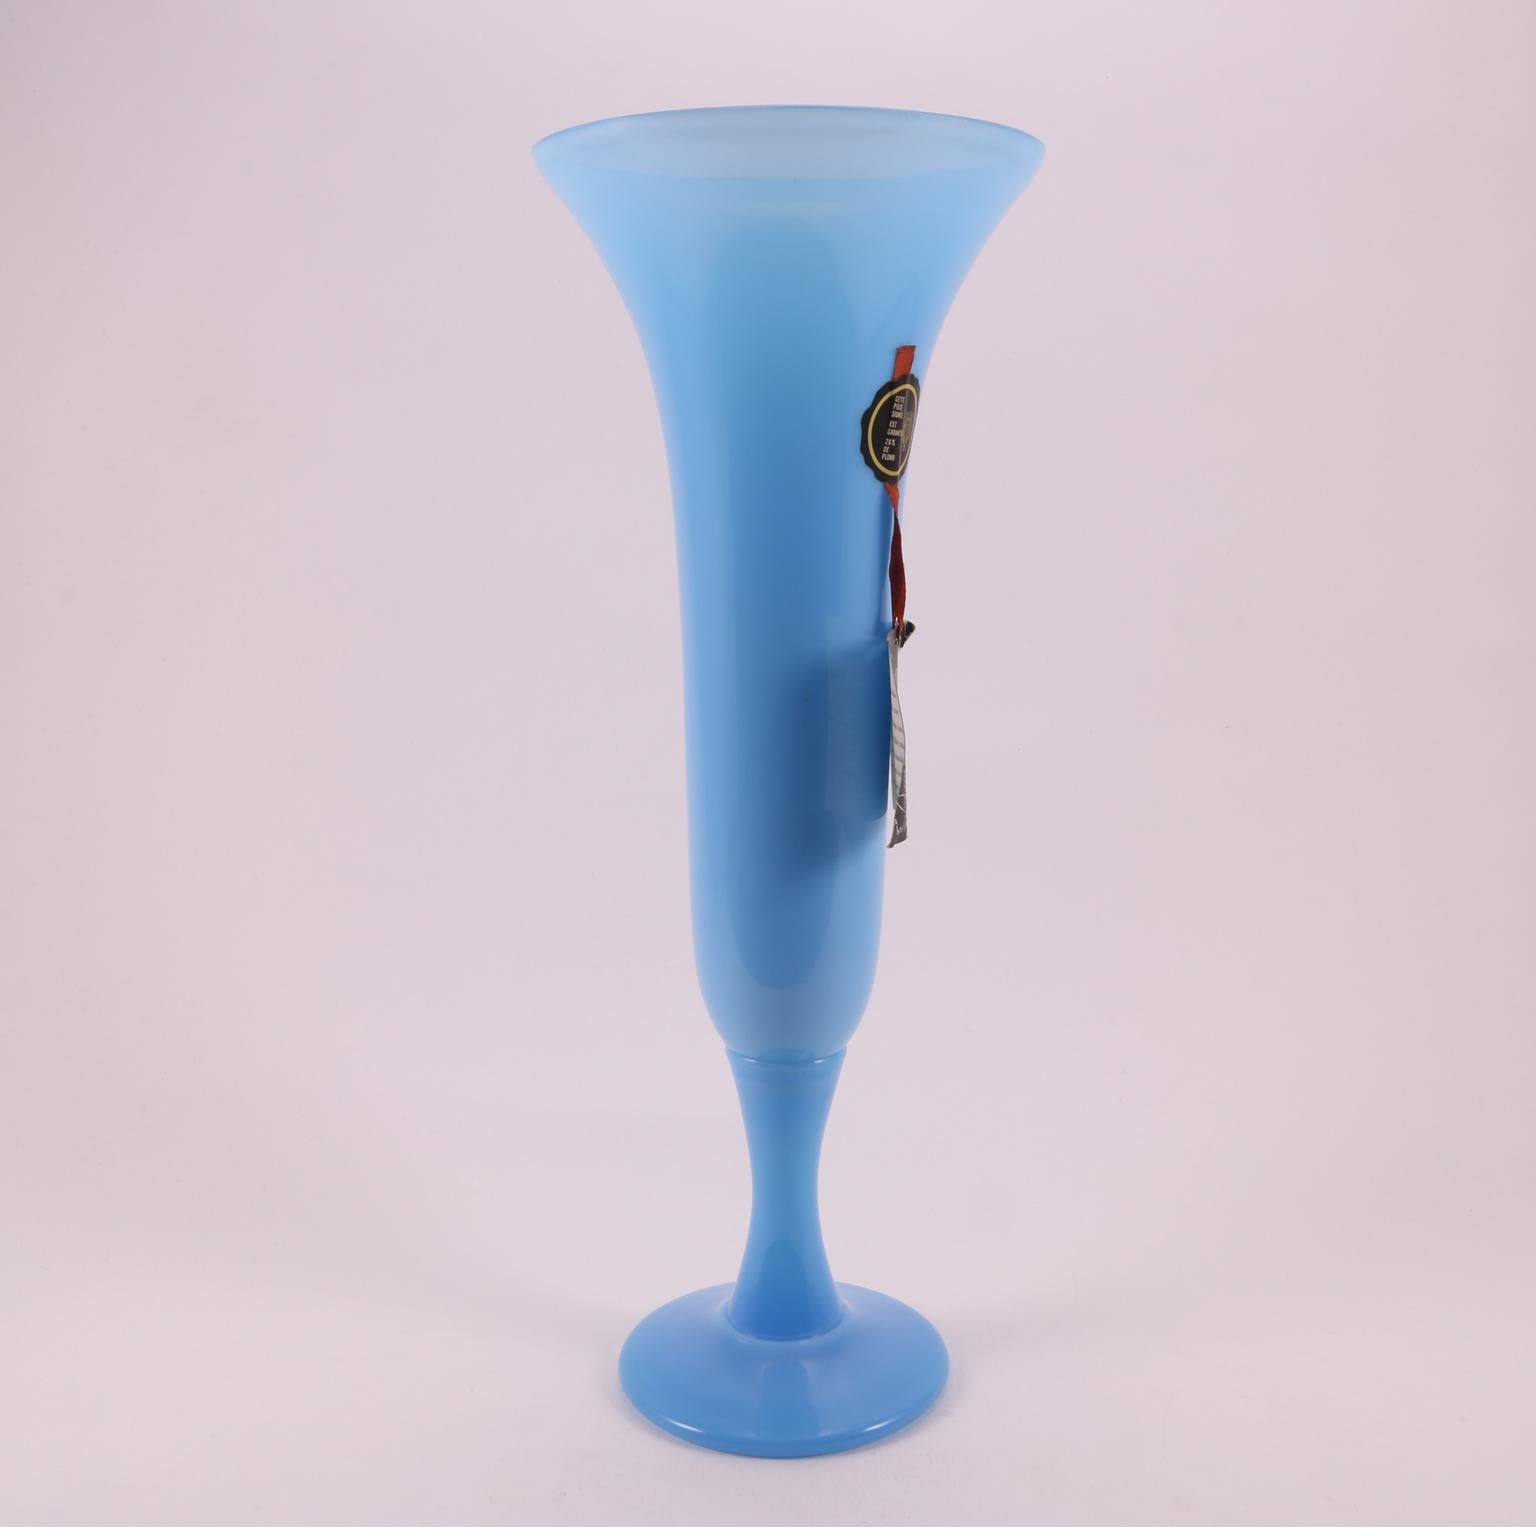 An original Sevrès opaline glass vase, handblown in France, in a captivating light turquoise shade.
With a slender and elegant body it presents a careful and powerful beauty at the same time, own of the Cristallerie De Sèvres.
With original ribbon